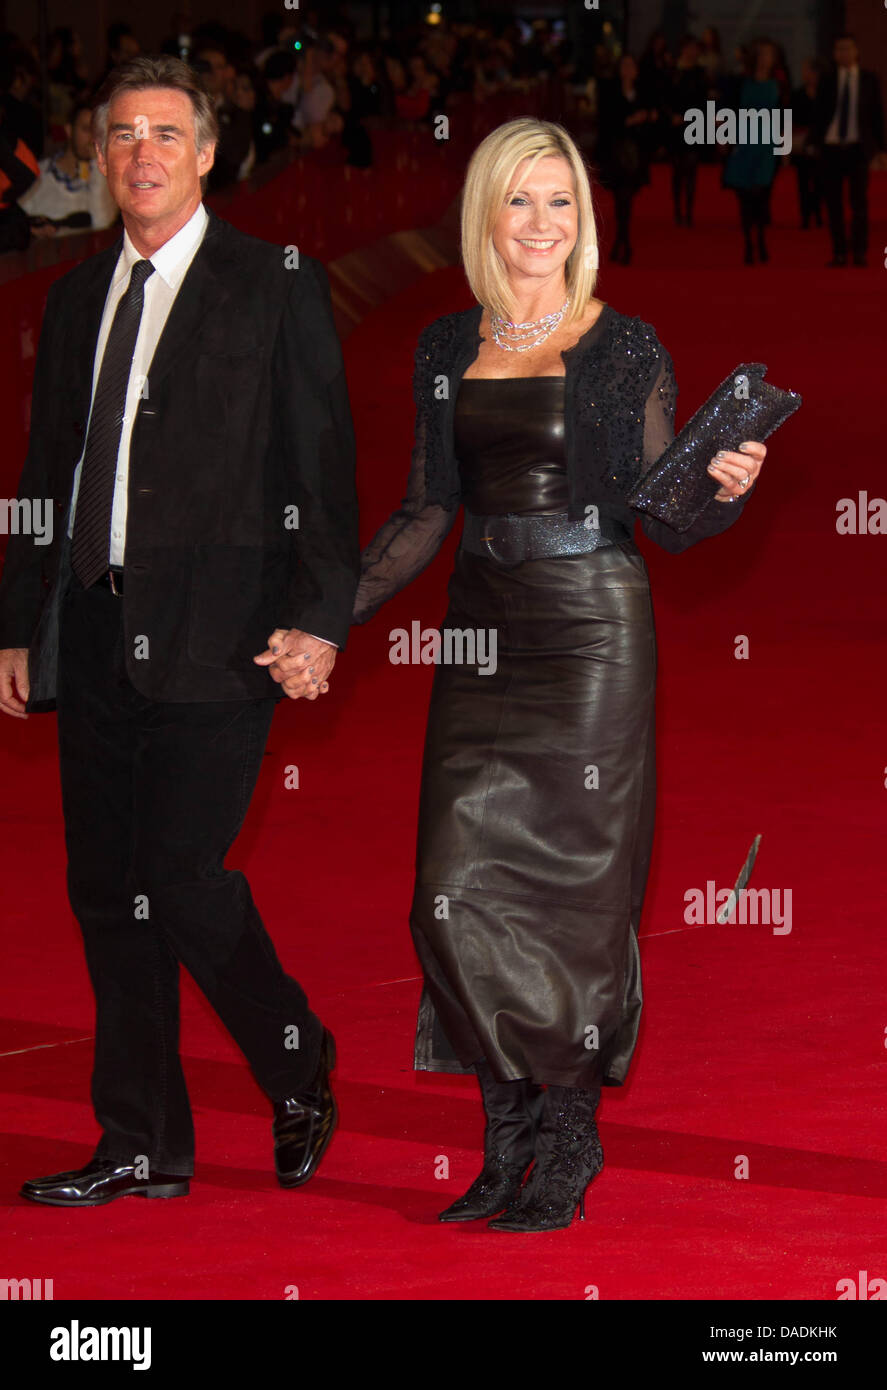 British-Australian actress Olivia Newton-John (R) and her husband Amazon John Easterling attend the premiere of her new film 'A Few Best Men' during the 6th International Rome Film Festival at Auditorium Parco Della Musica in Rome, Italy, on 28 October 2011. Photo: Hubert Boesl Stock Photo